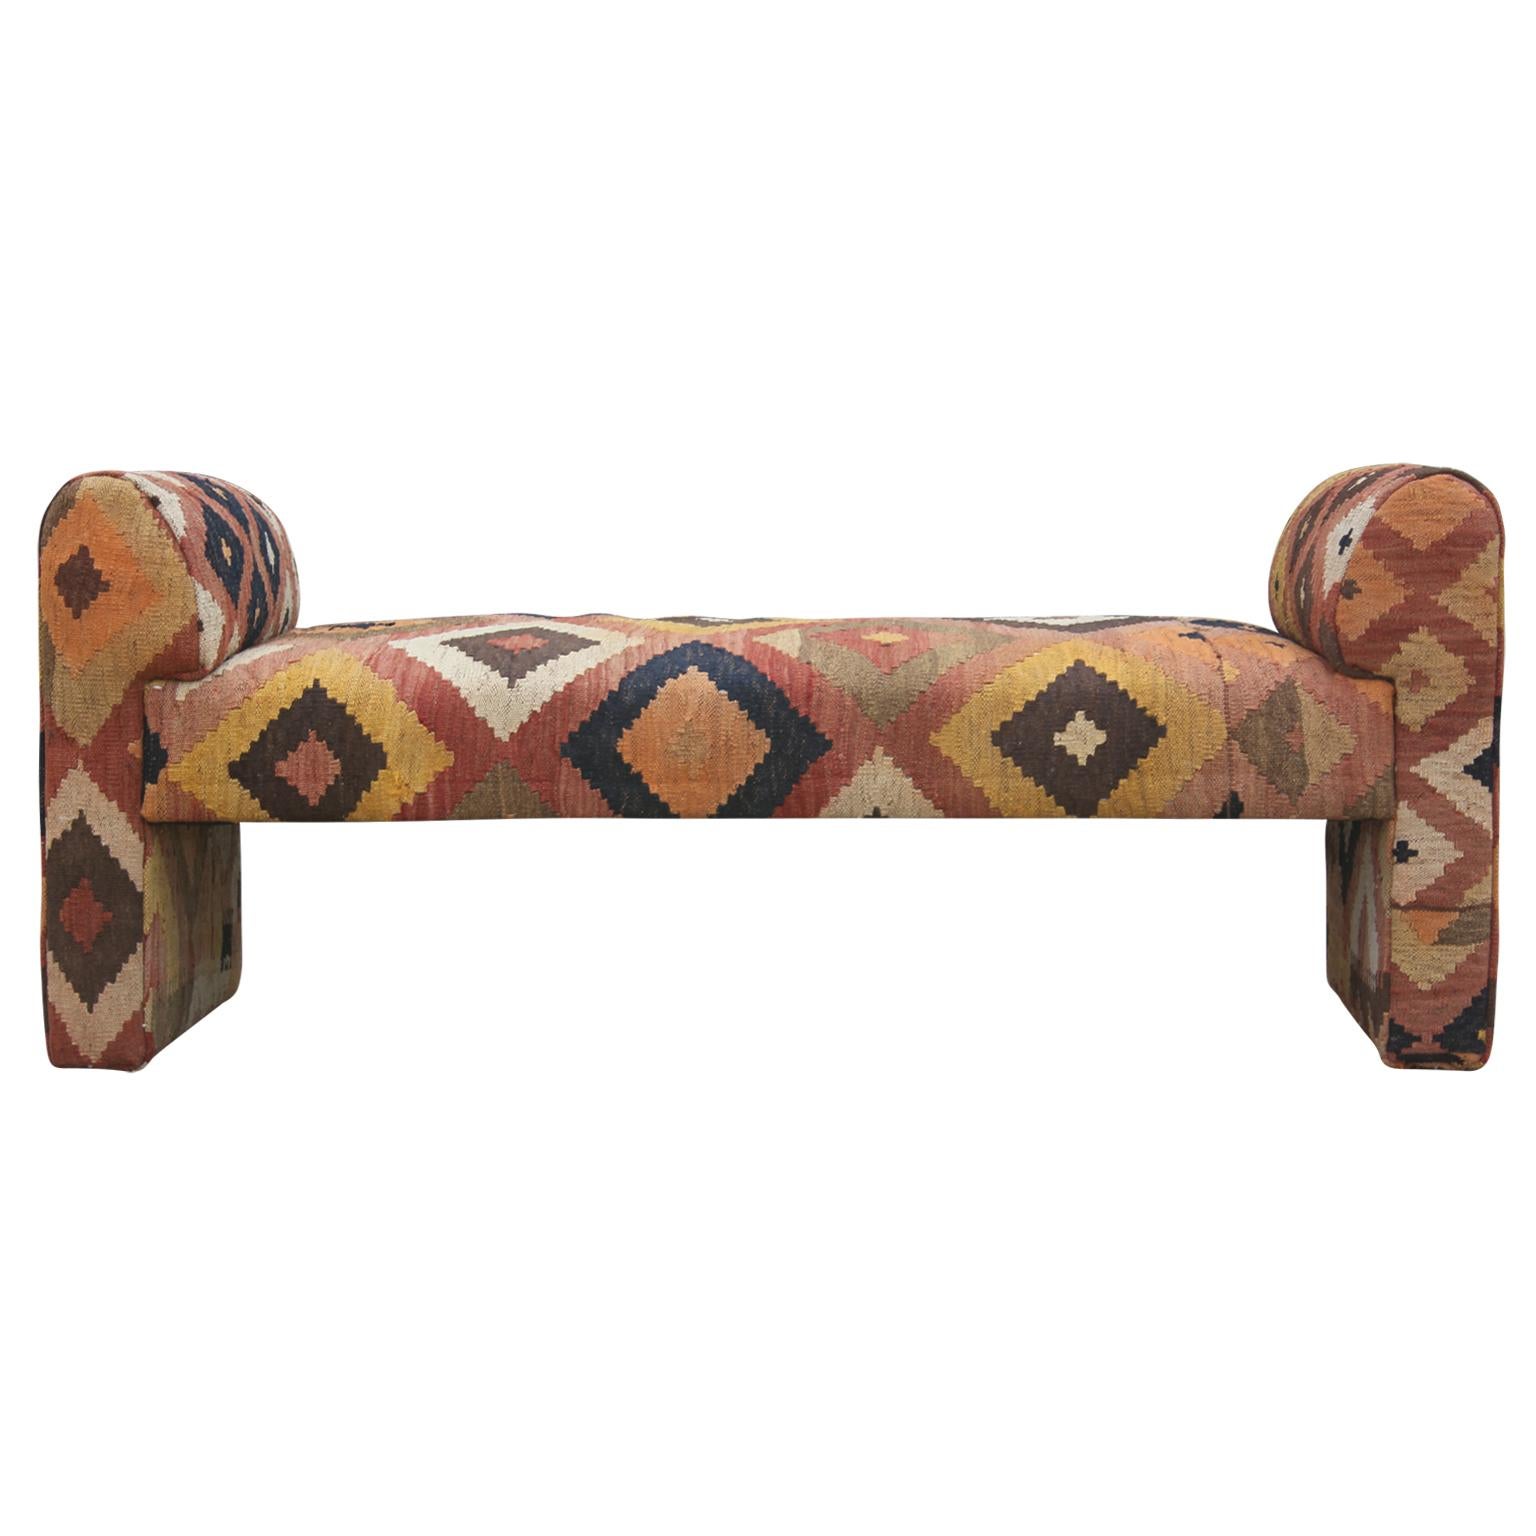 A custom Milo Baughman styled modern bench upholstered in a seventy year old whimsical geometric flat-weave tribal Kilim rug. Features warm amber and burnt orange tones. This piece will look great in any room, and the rug material will serve as a